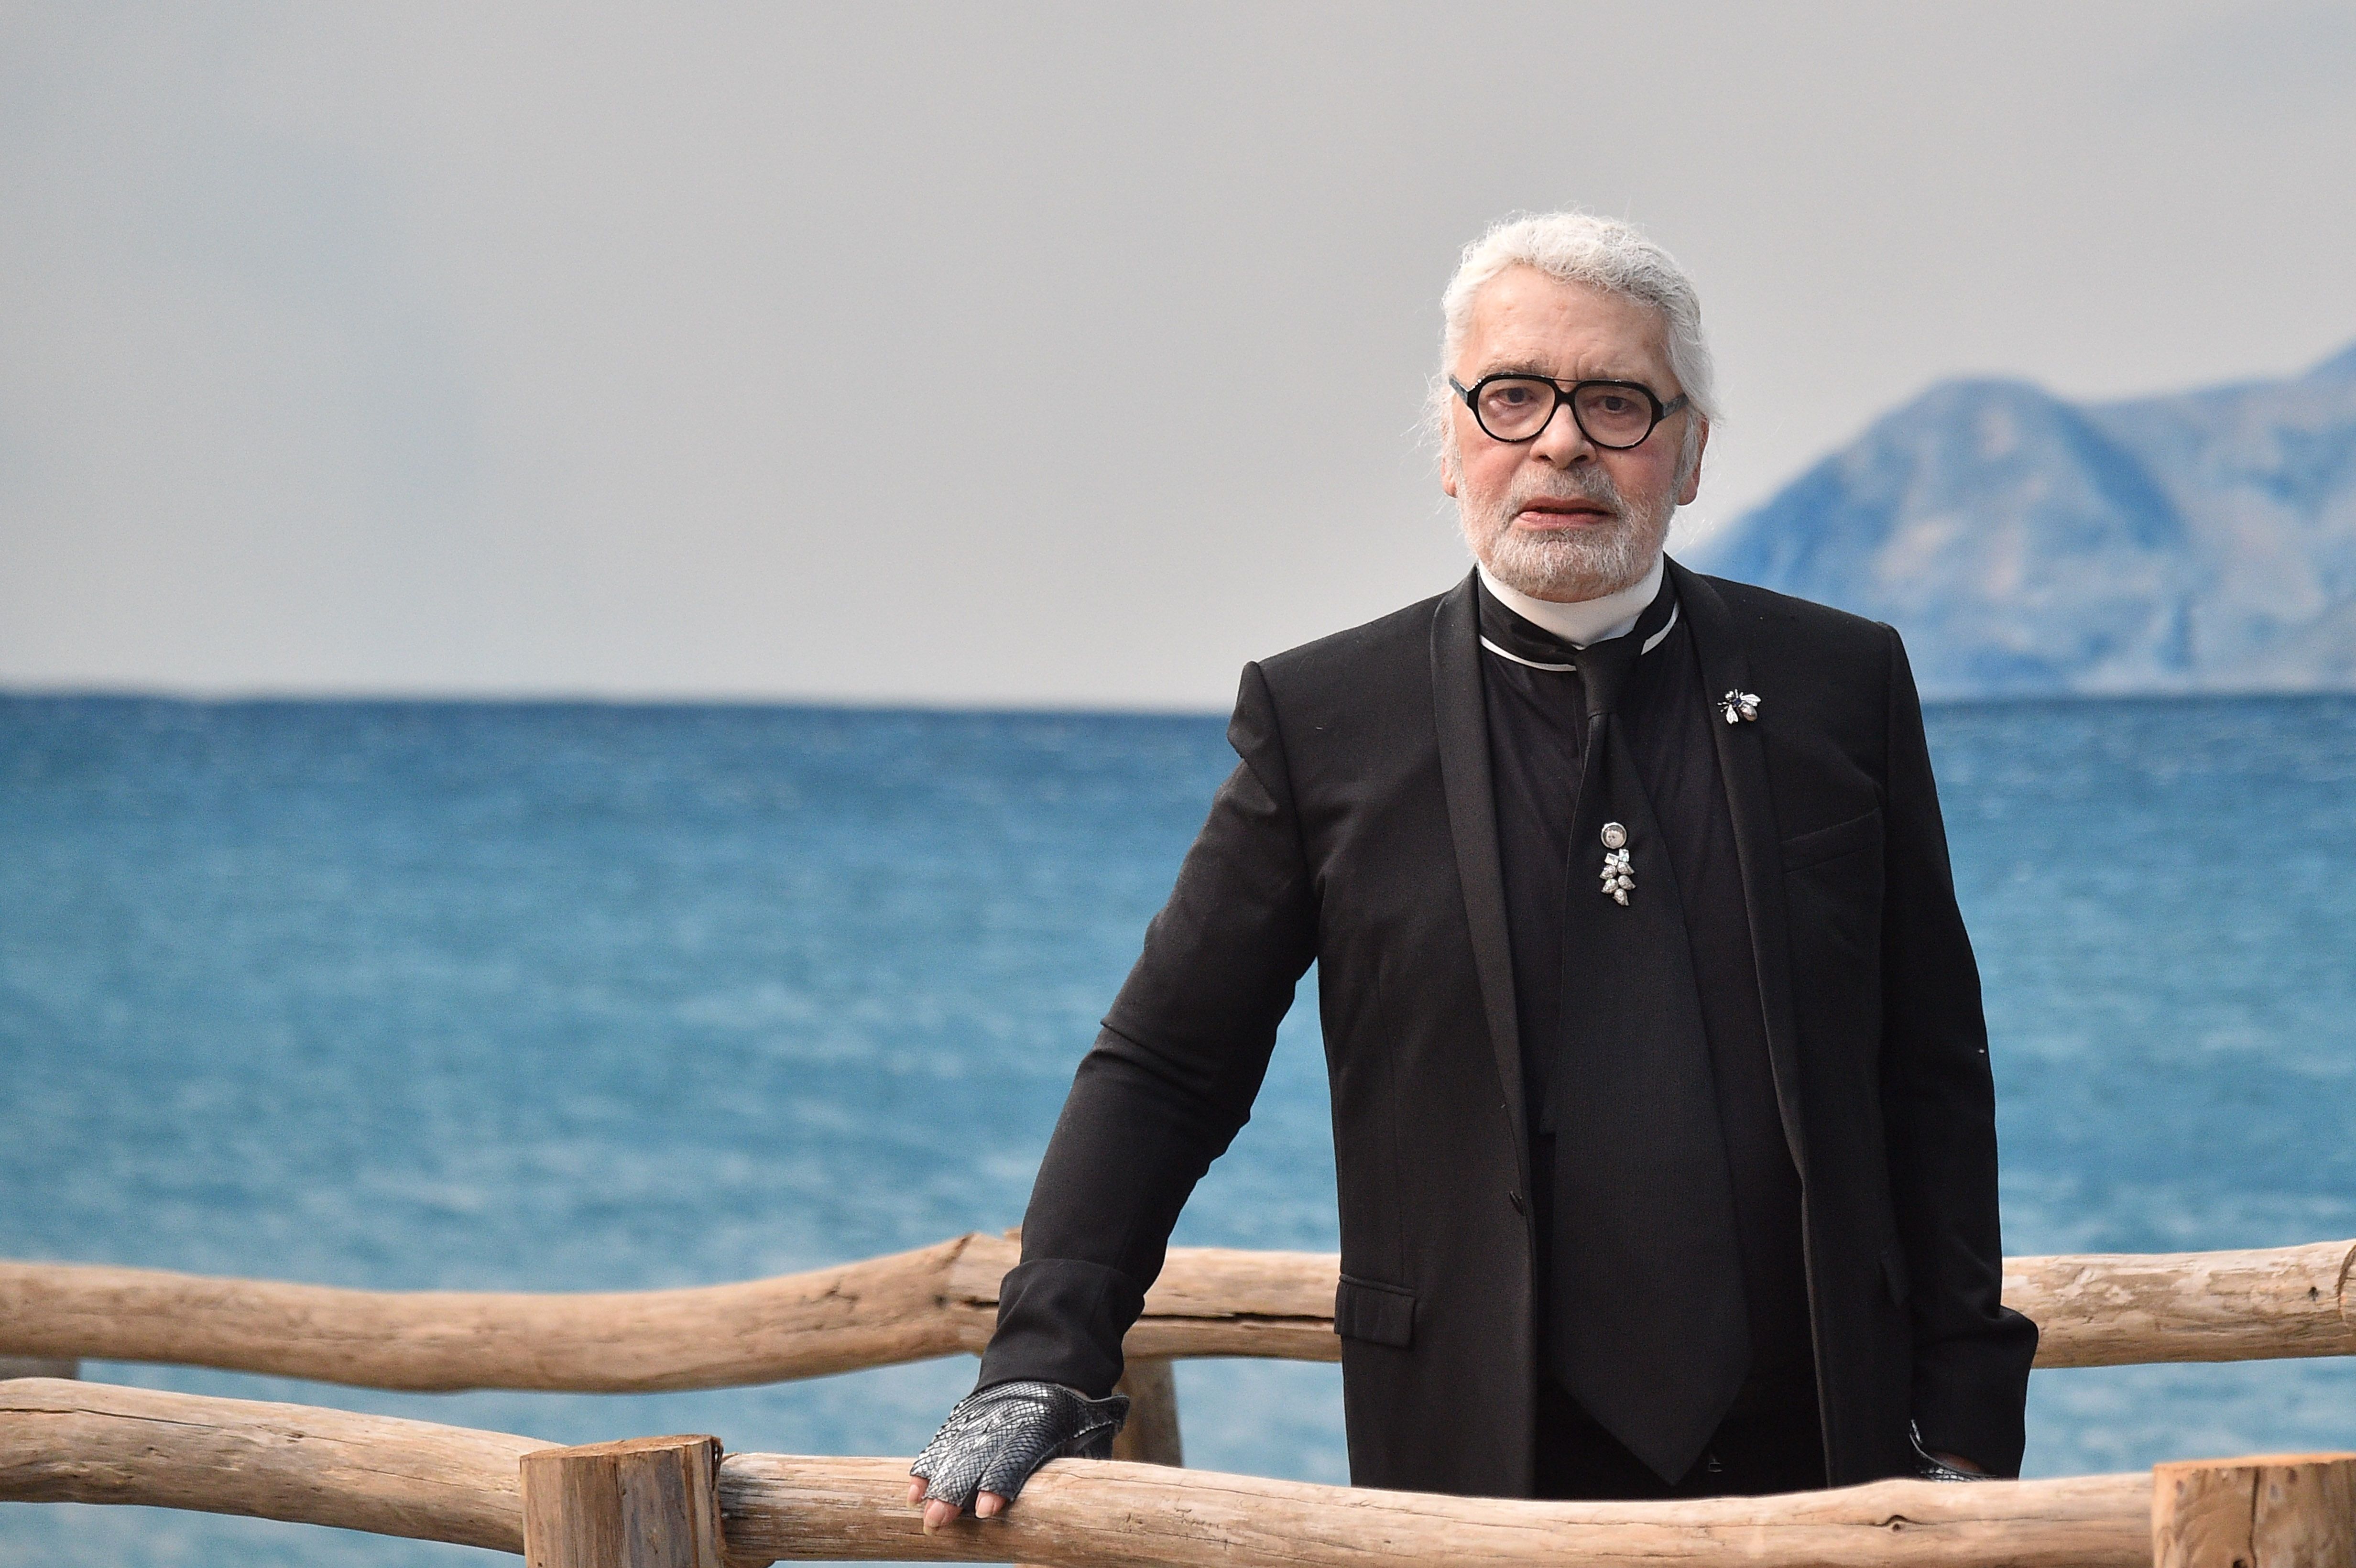 Karl Lagerfeld has died, Read original tributes from the fashion world, VOGUE India